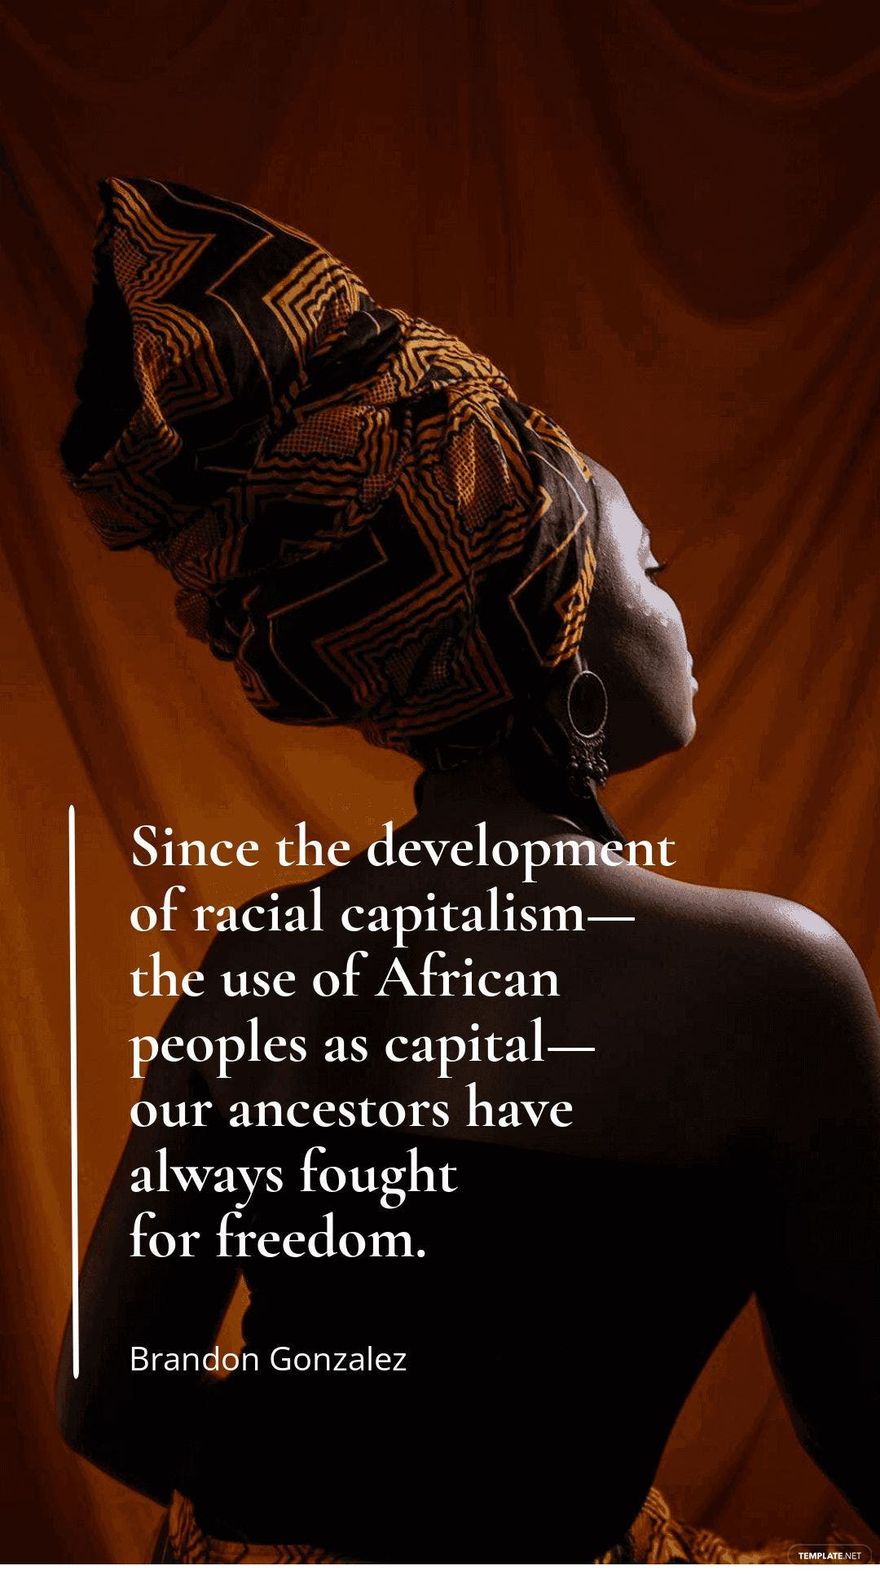 Brandon Gonzalez - Since the development of racial capitalism—the use of African peoples as capital—our ancestors have always fought for freedom.